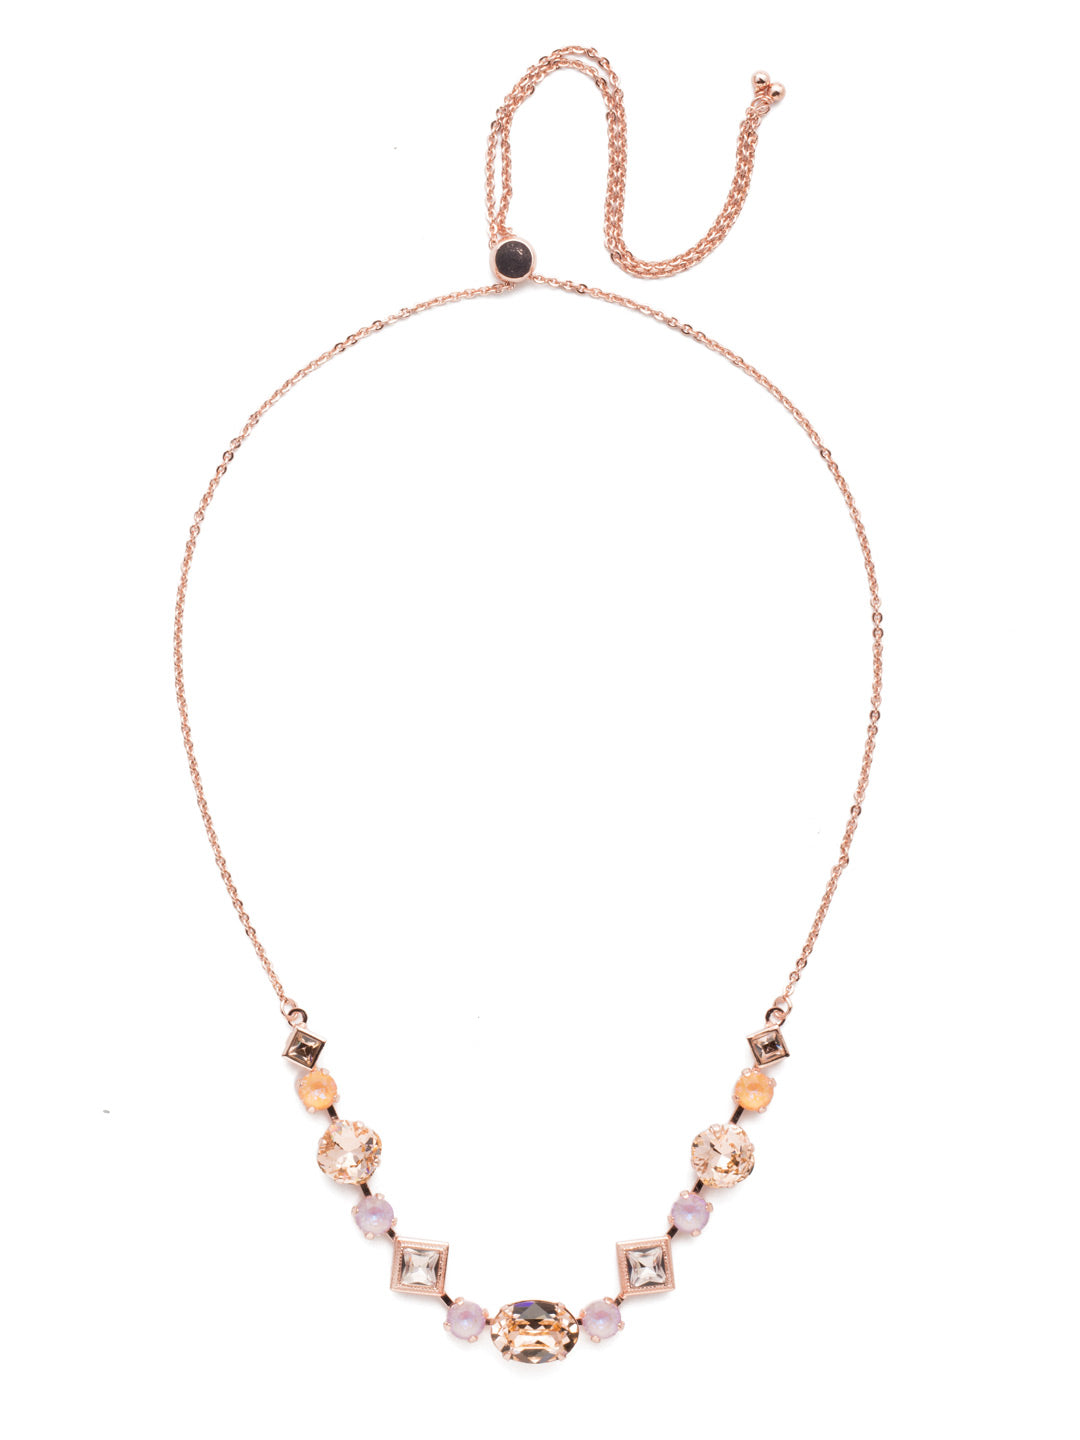 Cordelia Tennis Necklace - NEK29RGLVP - <p>Can't decide on a favorite gem shape? Good news! We've got you covered with this classic necklace perfect for a romantic night out, or for making an ordinary outfit extra special. From Sorrelli's Lavender Peach collection in our Rose Gold-tone finish.</p>